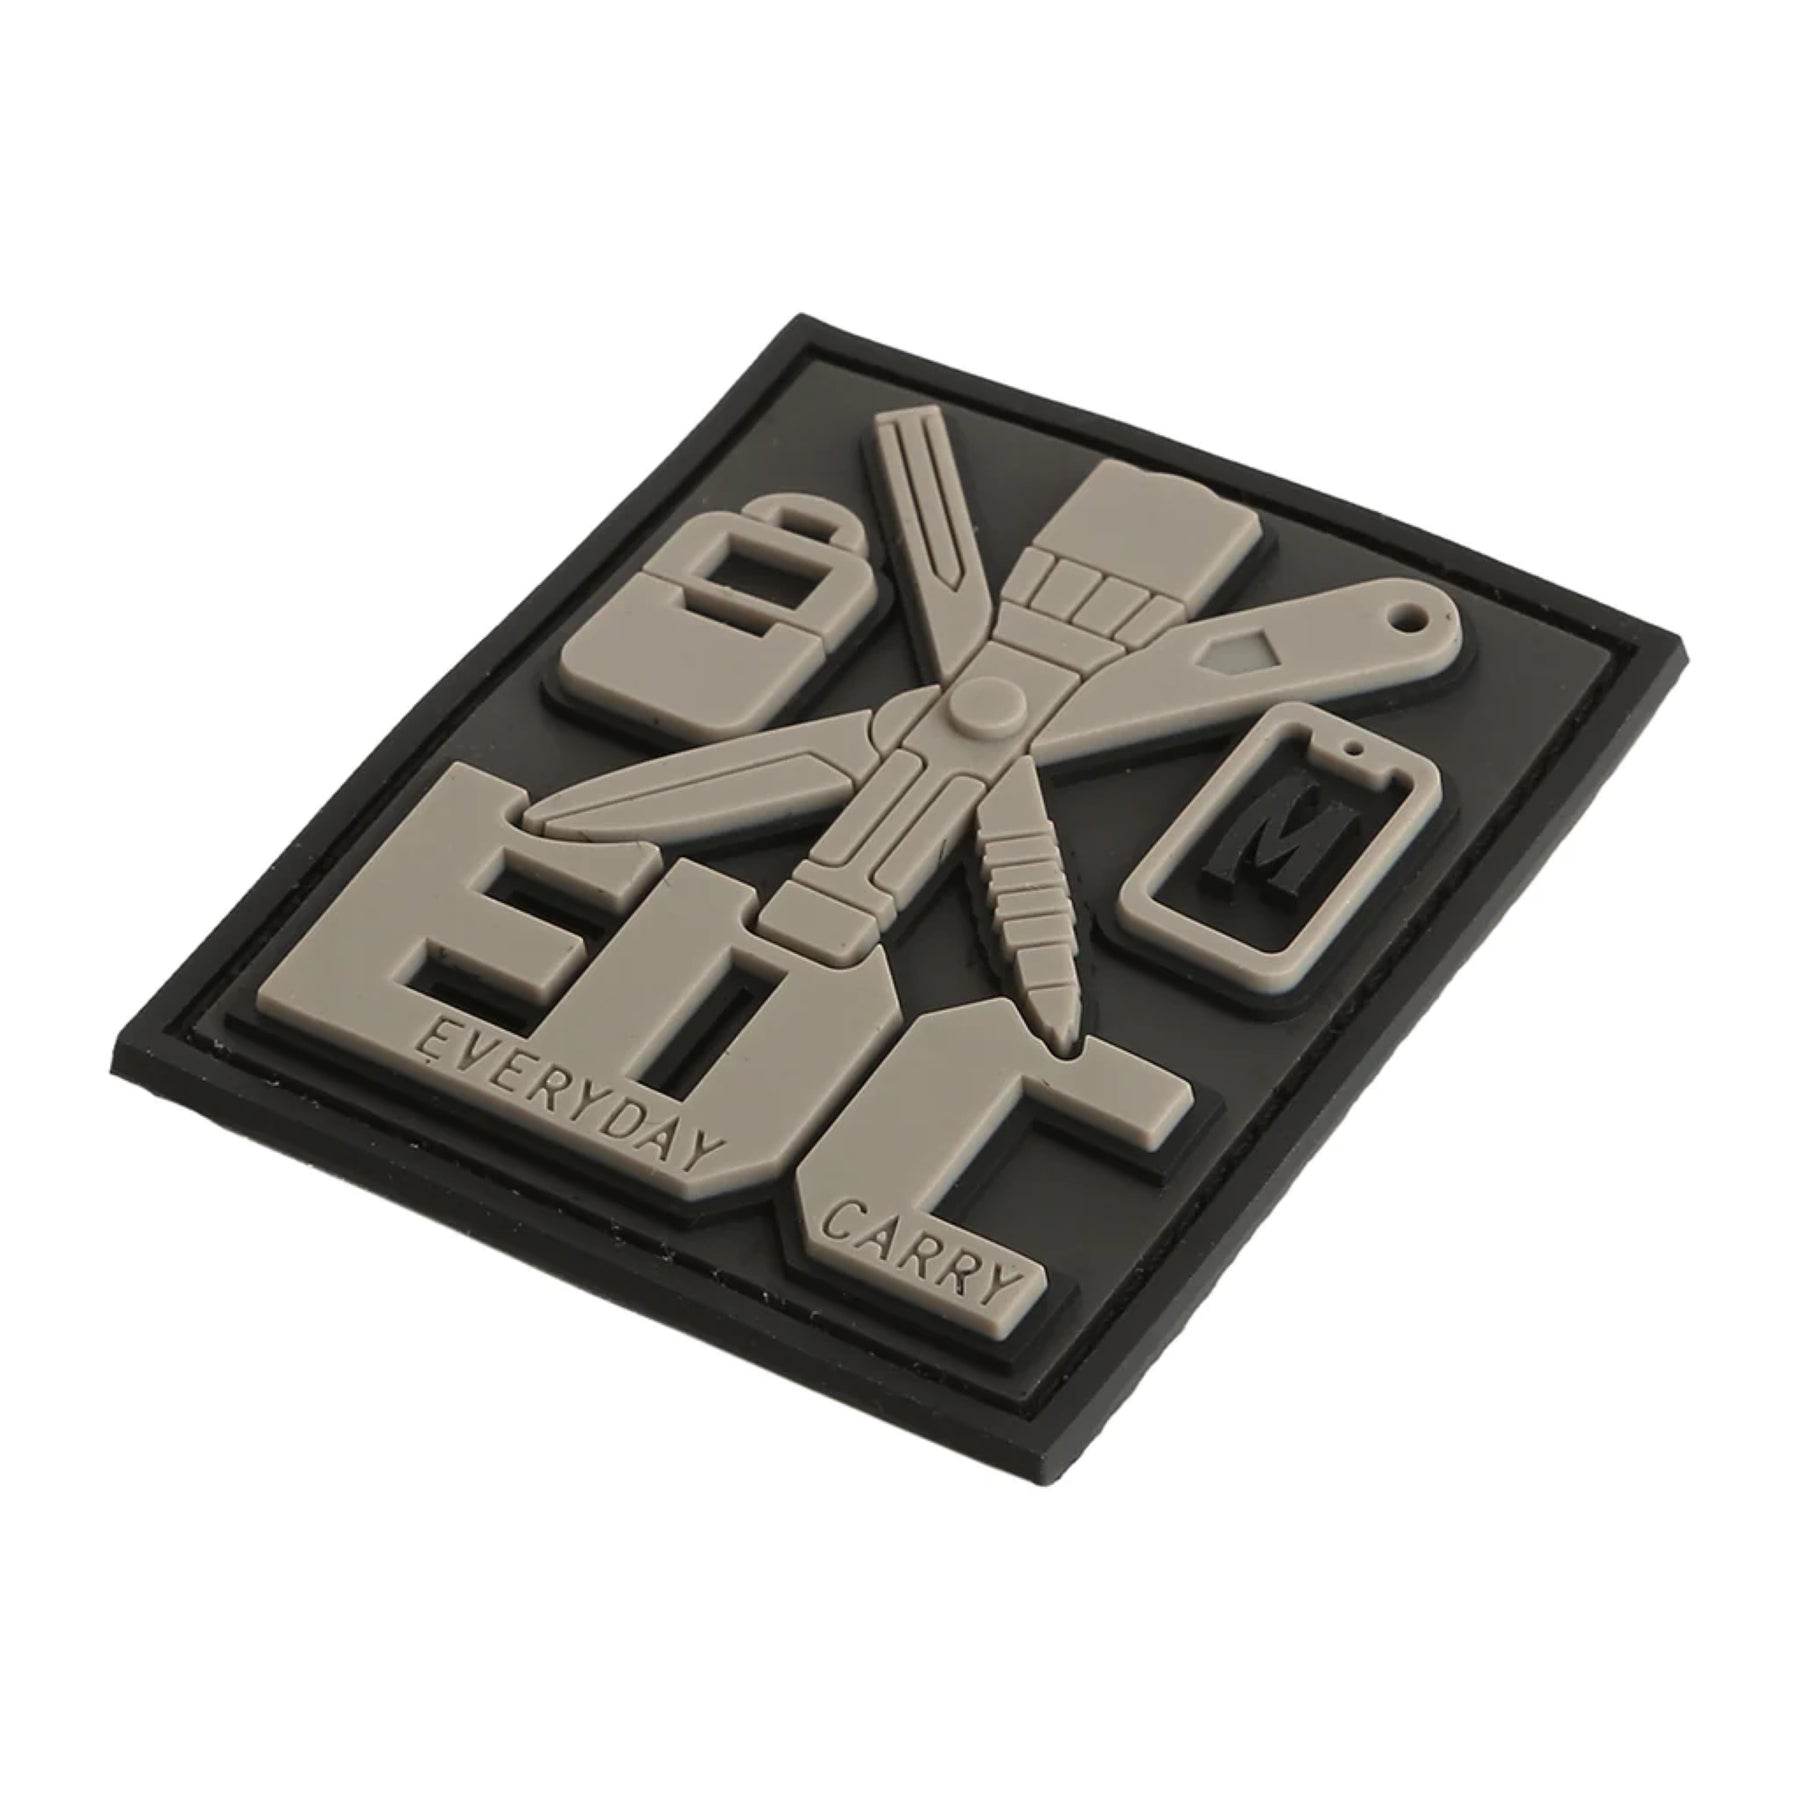 PATCH VELCRO MAXPEDITION PVC - EVERYDAY CARRY